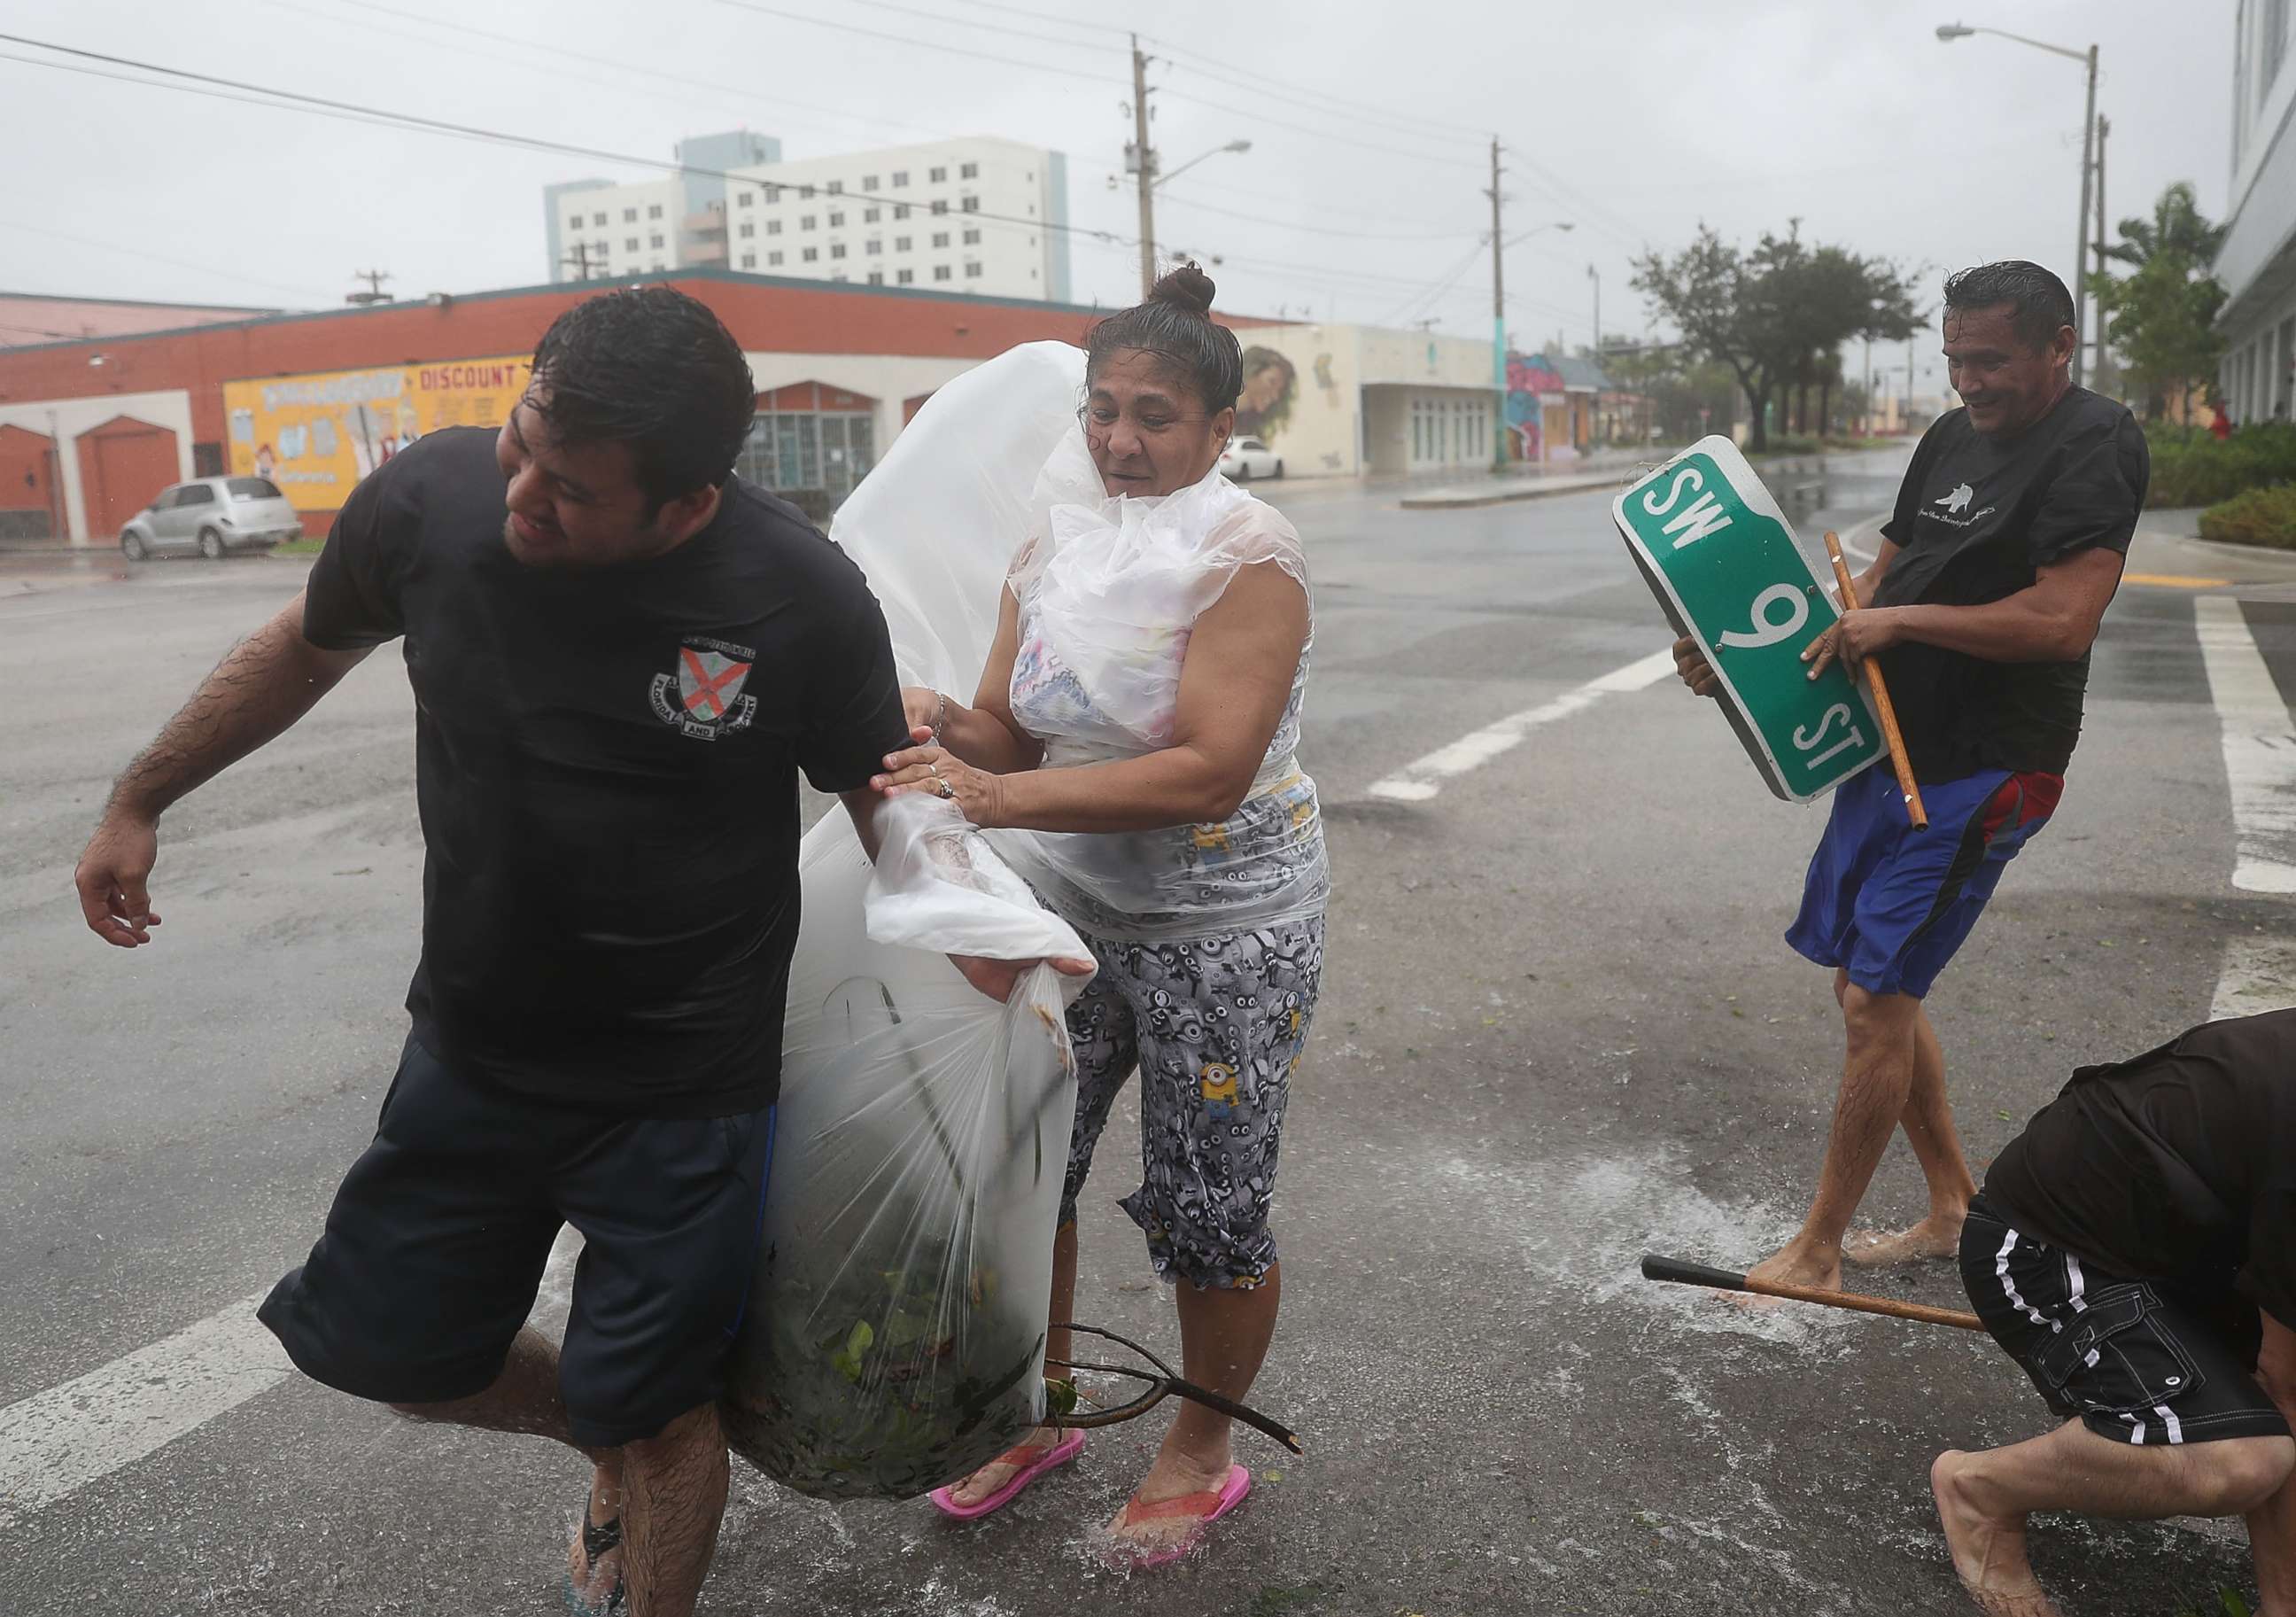 PHOTO: People clear debris out of a drainage ditch in an attempt to keep the area from flooding as Hurricane Irma passes through on Sept. 10, 2017 in Miami.